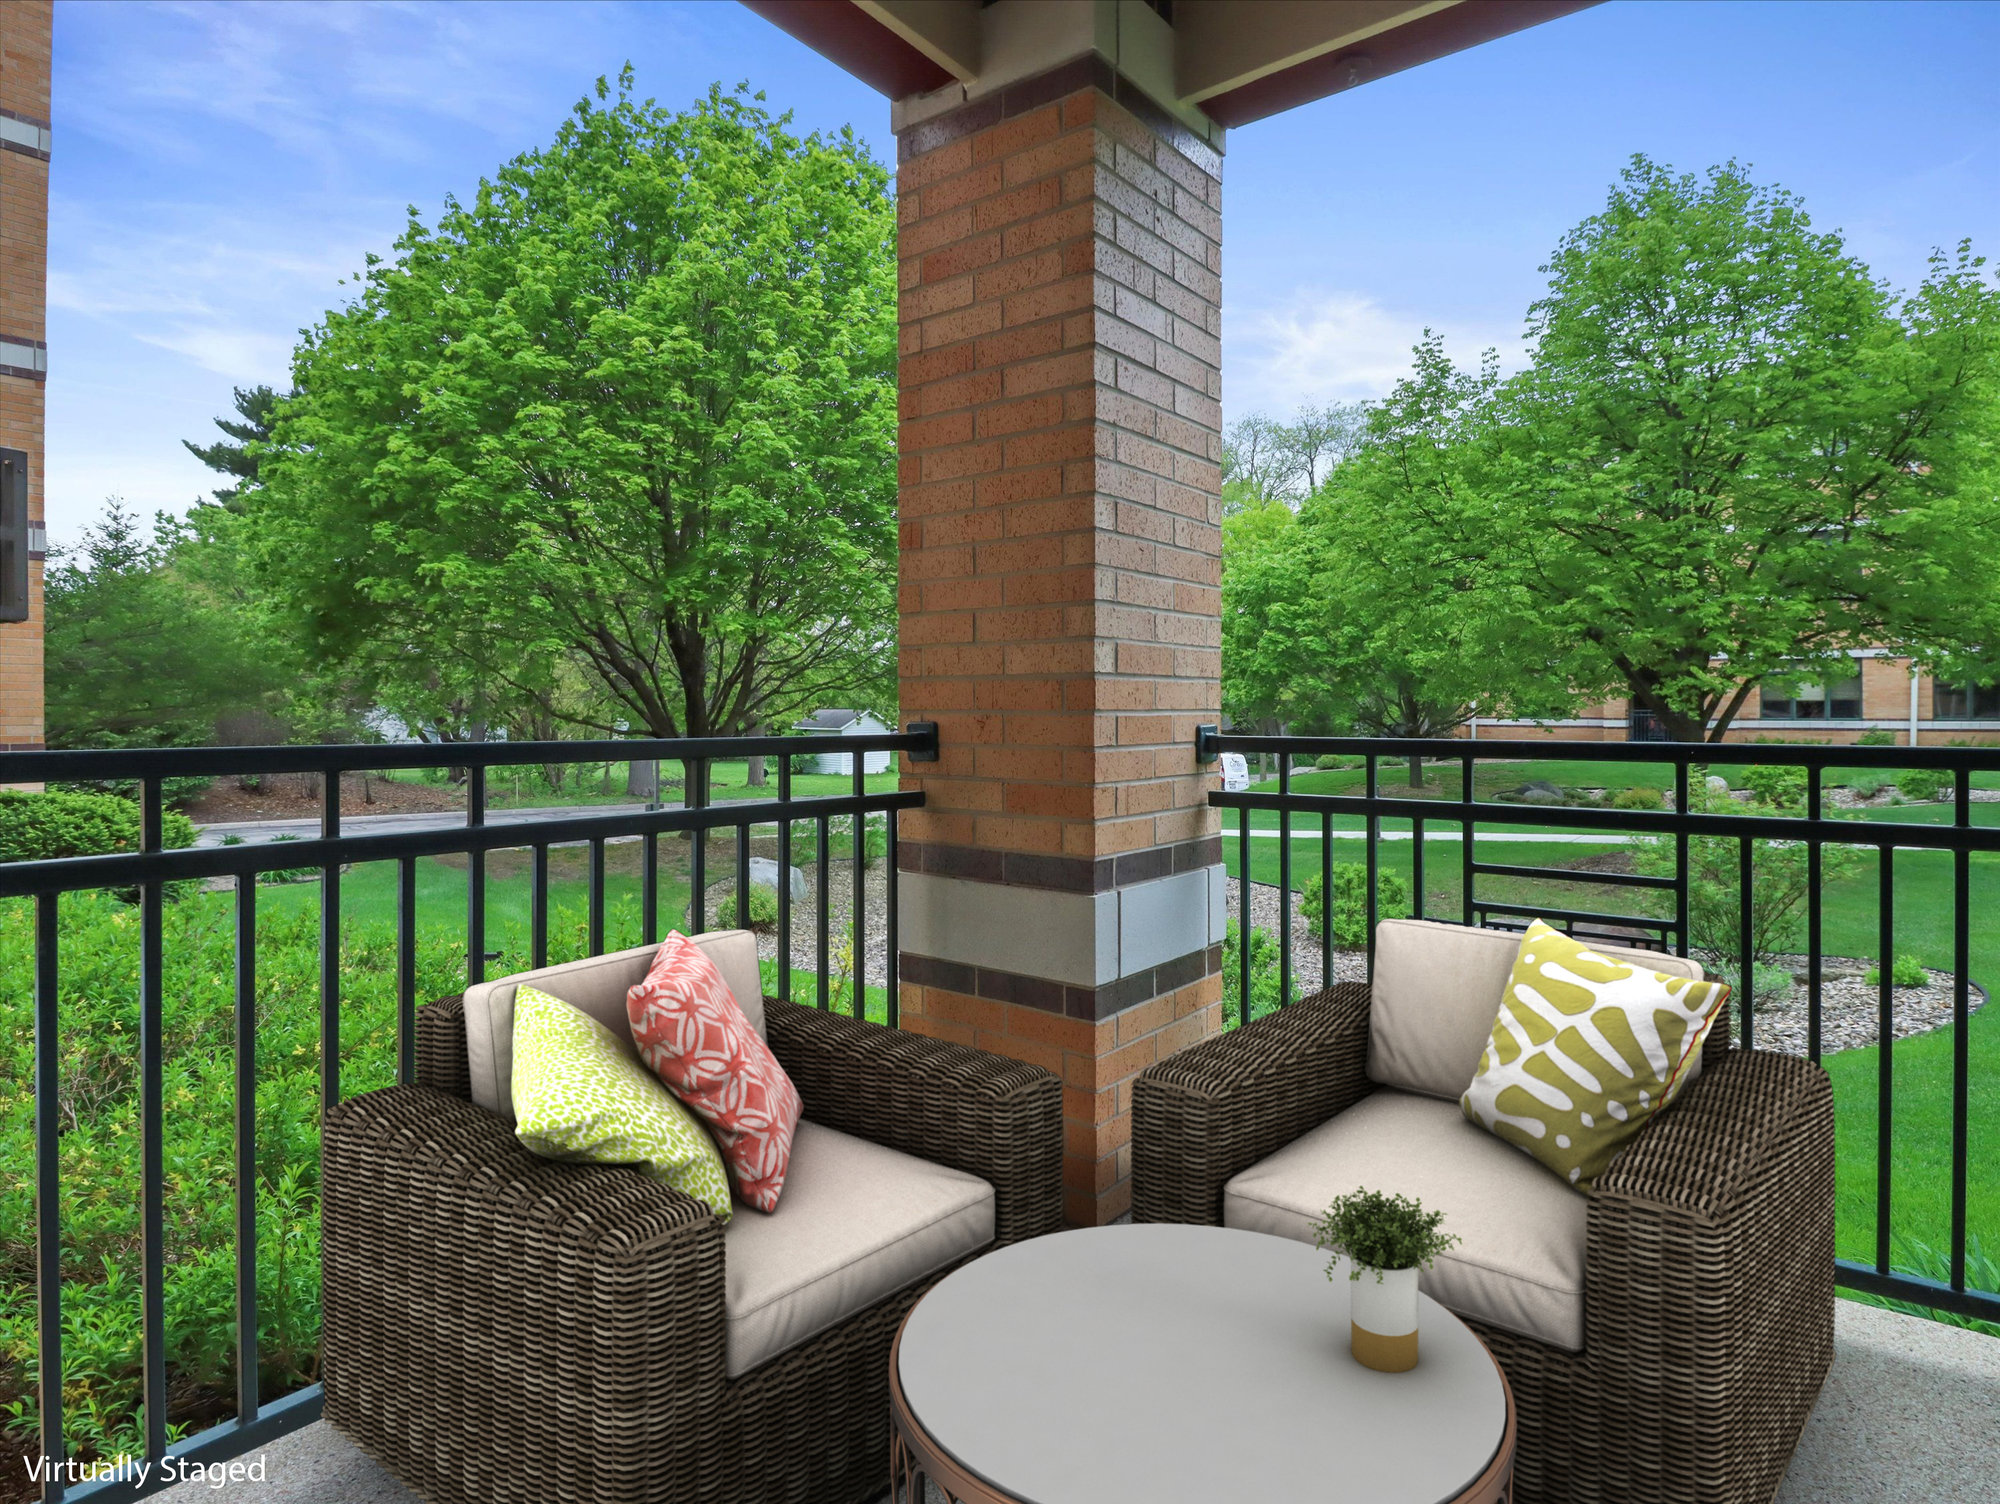 Virtual Staging of Exterior Space